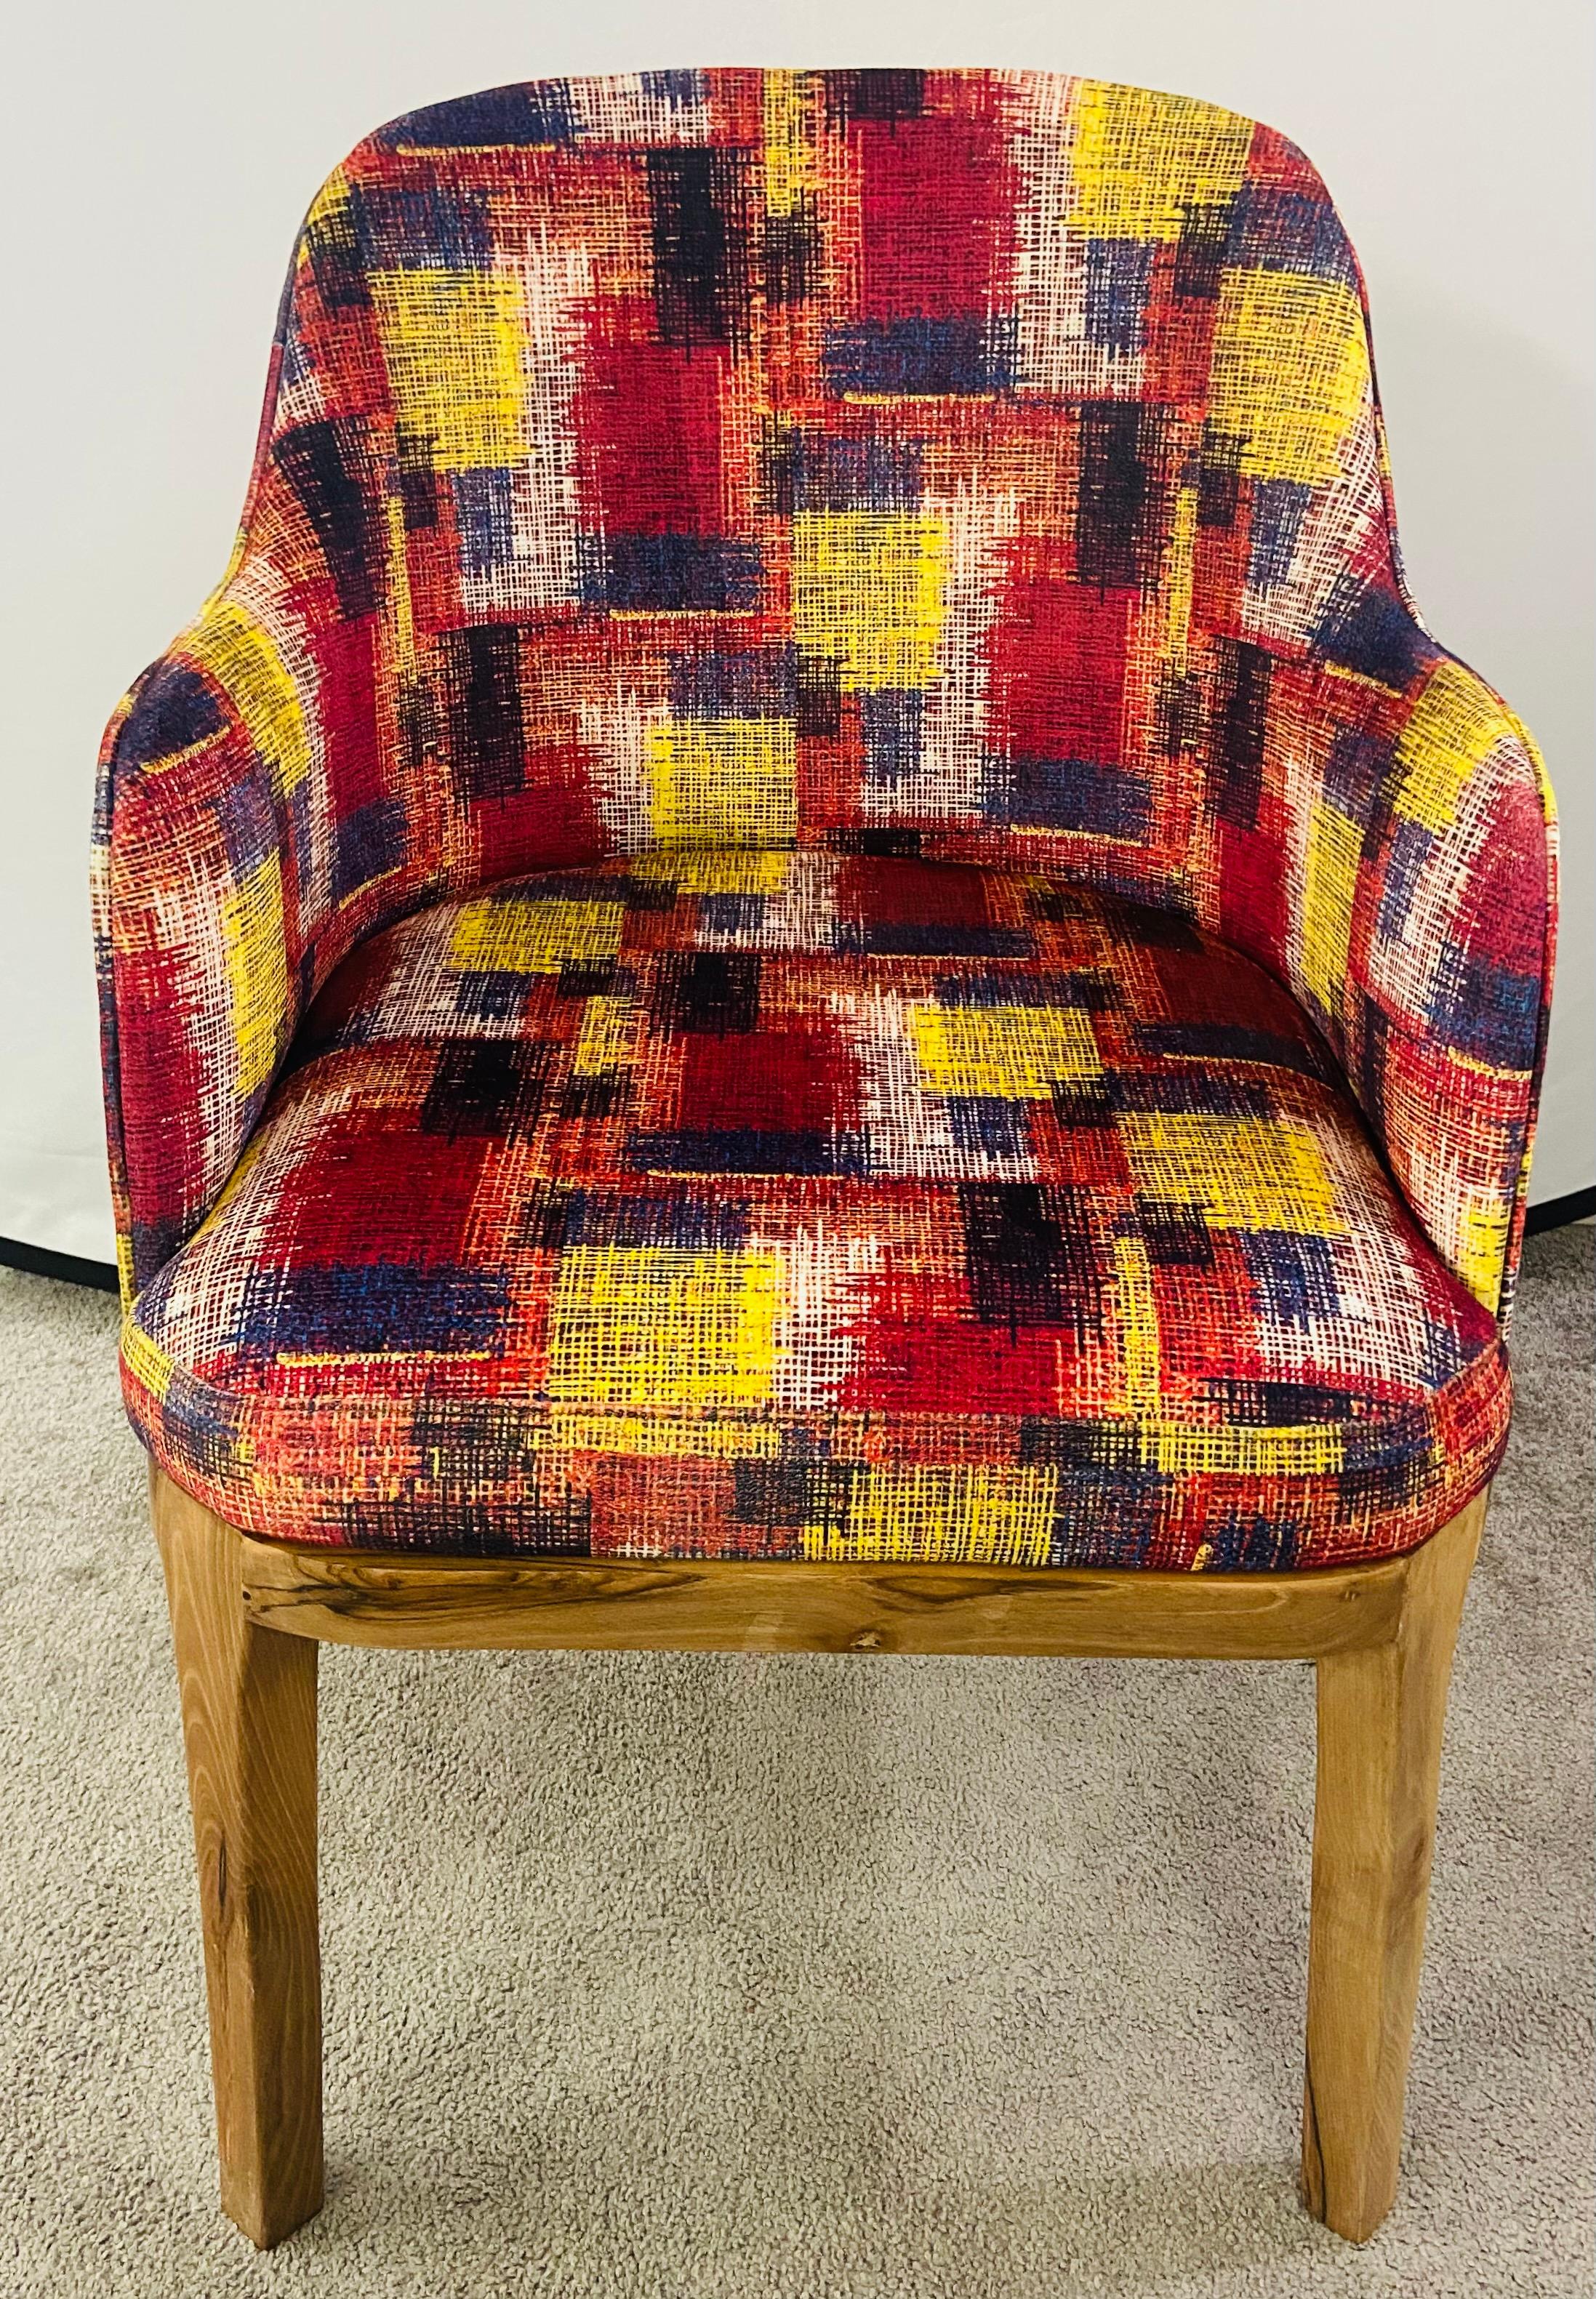 A stylish pair of Mid Century Modern style barrel chairs. The chairs feature a recent upholstery in vivid dark blue, yellow and cranberry colors. The high quality chairs are made of walnut wood. The natural color of the walnut wood showing burl